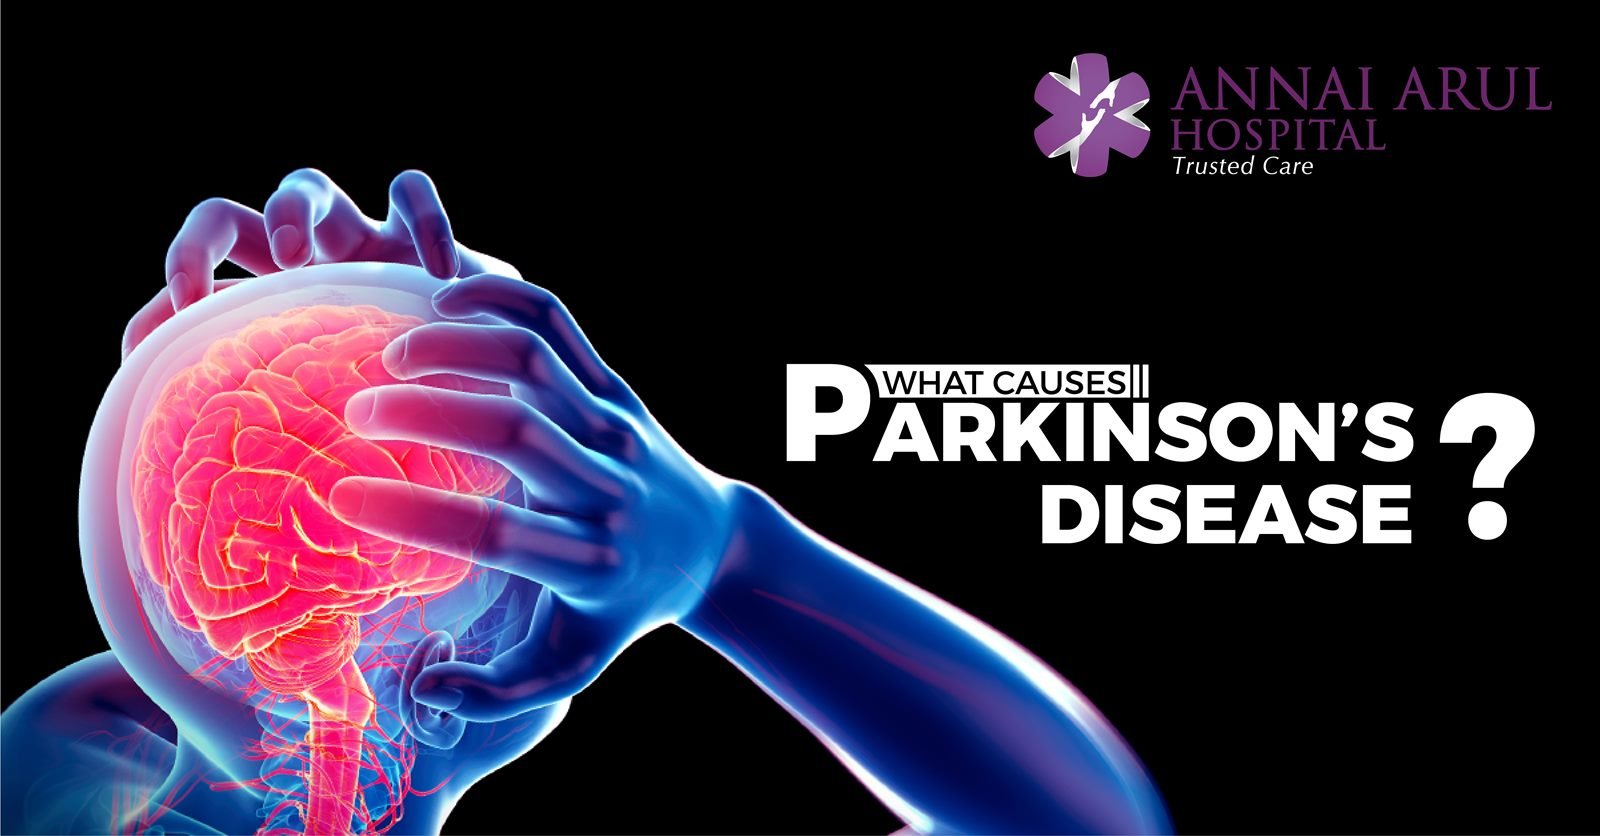 WHAT CAUSES PARKINSONâS DISEASE? â Multispeciality Hospitals in Chennai